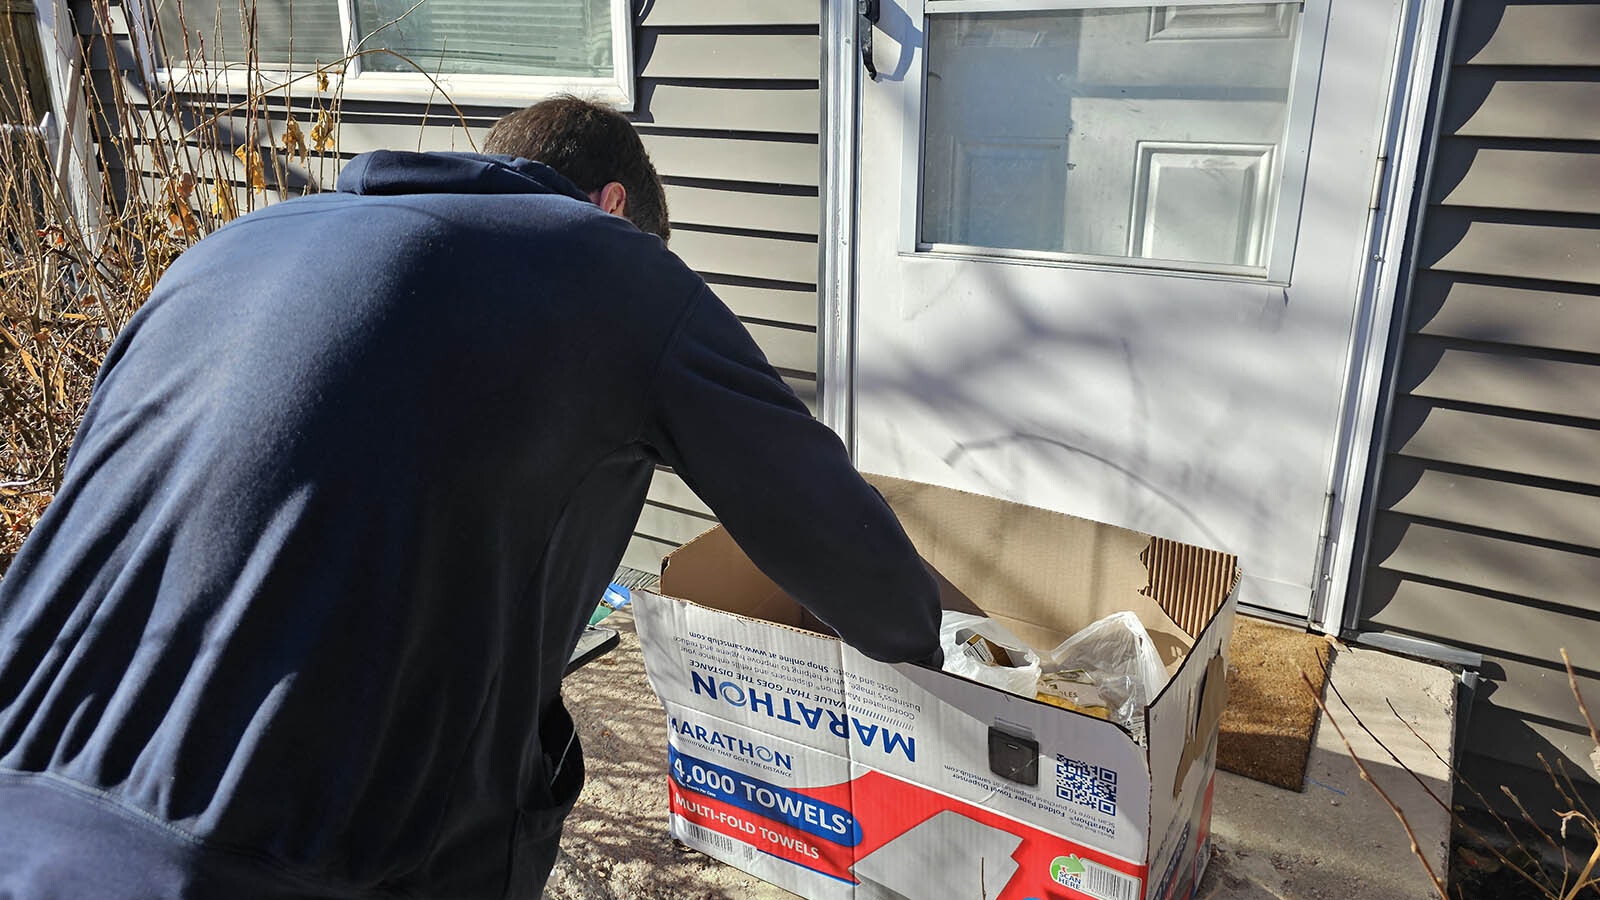 Landyn Medina tucks a 20 bill into a box of food he's leaving for a Cheyenne family whose home was inundated with floodwaters in the Cahill Park area.